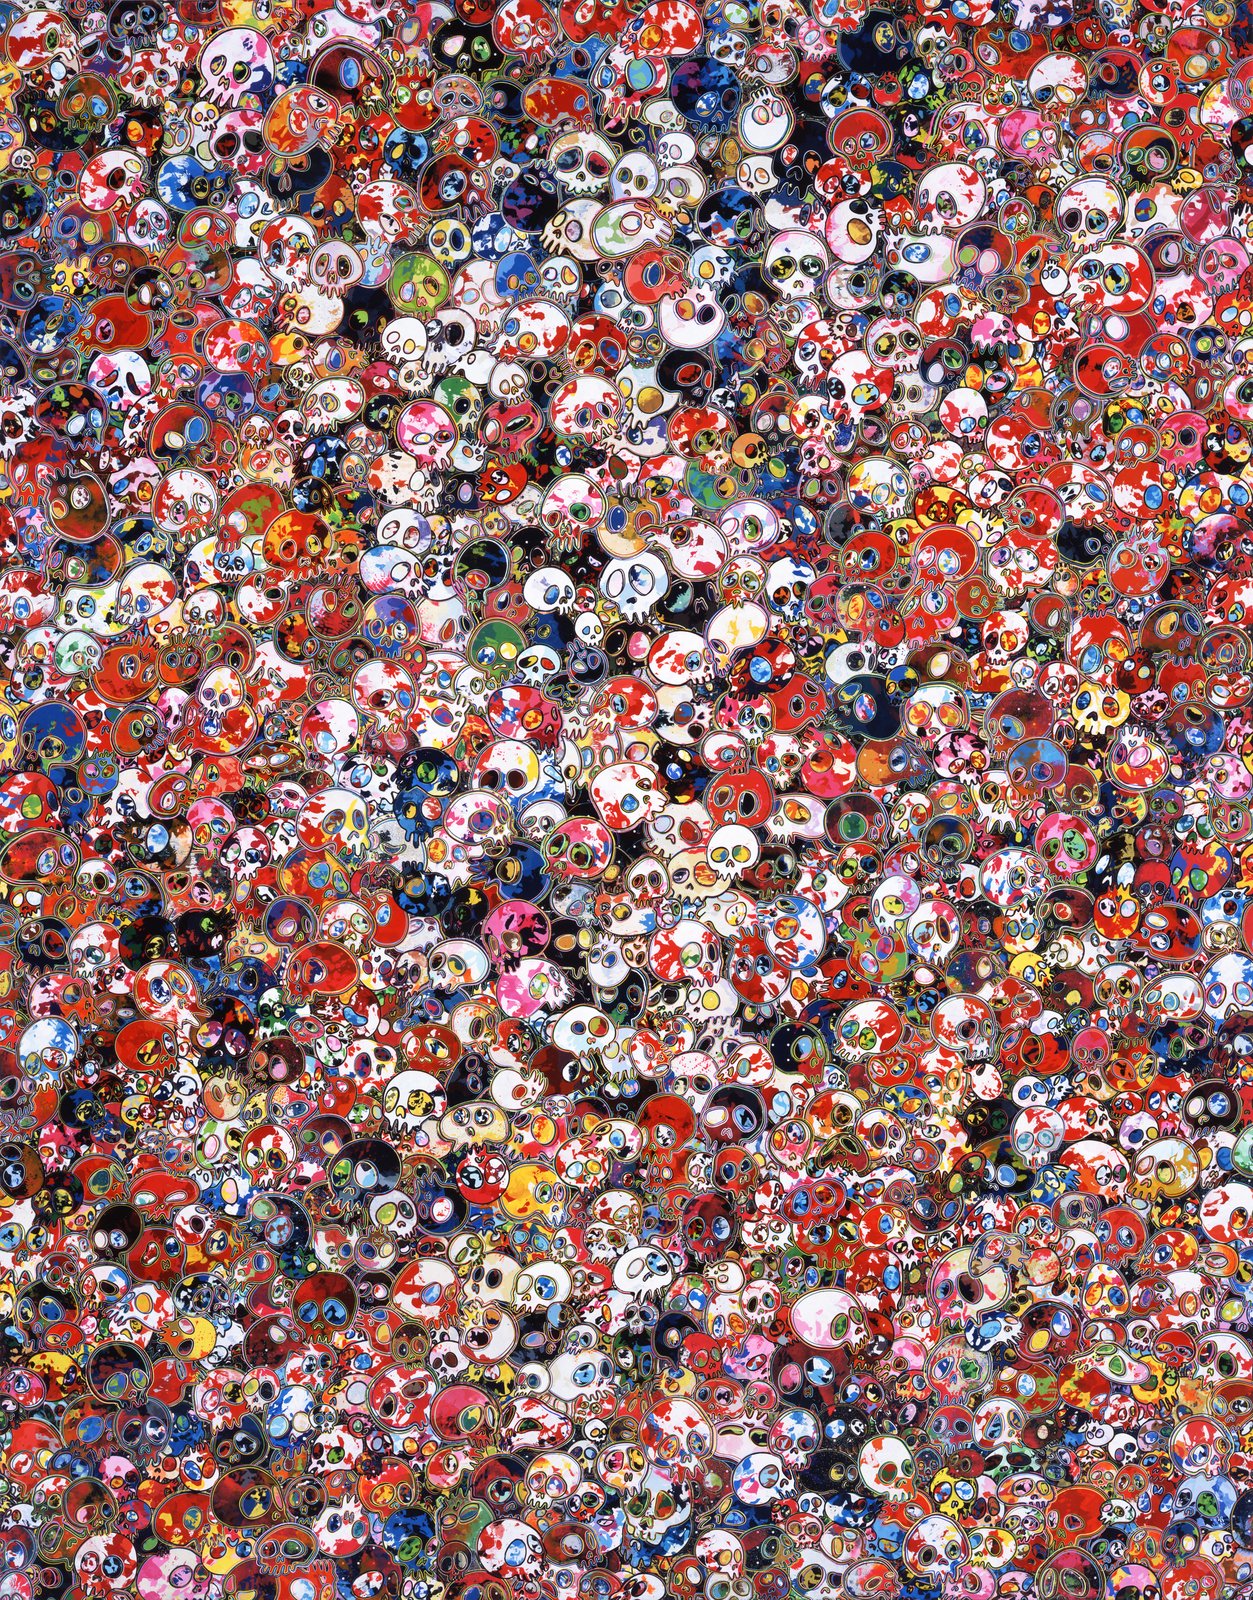 Takashi MurakamiMemories of a Passionate Life, 2015Acrylic on canvas mounted on aluminum frame, 300 &times; 234,4 cmPrivate collection. Courtesy Perrotin&copy; 2015 Takashi Murakami/Kaikai Kiki Co., Ltd. All Rights Reserved.